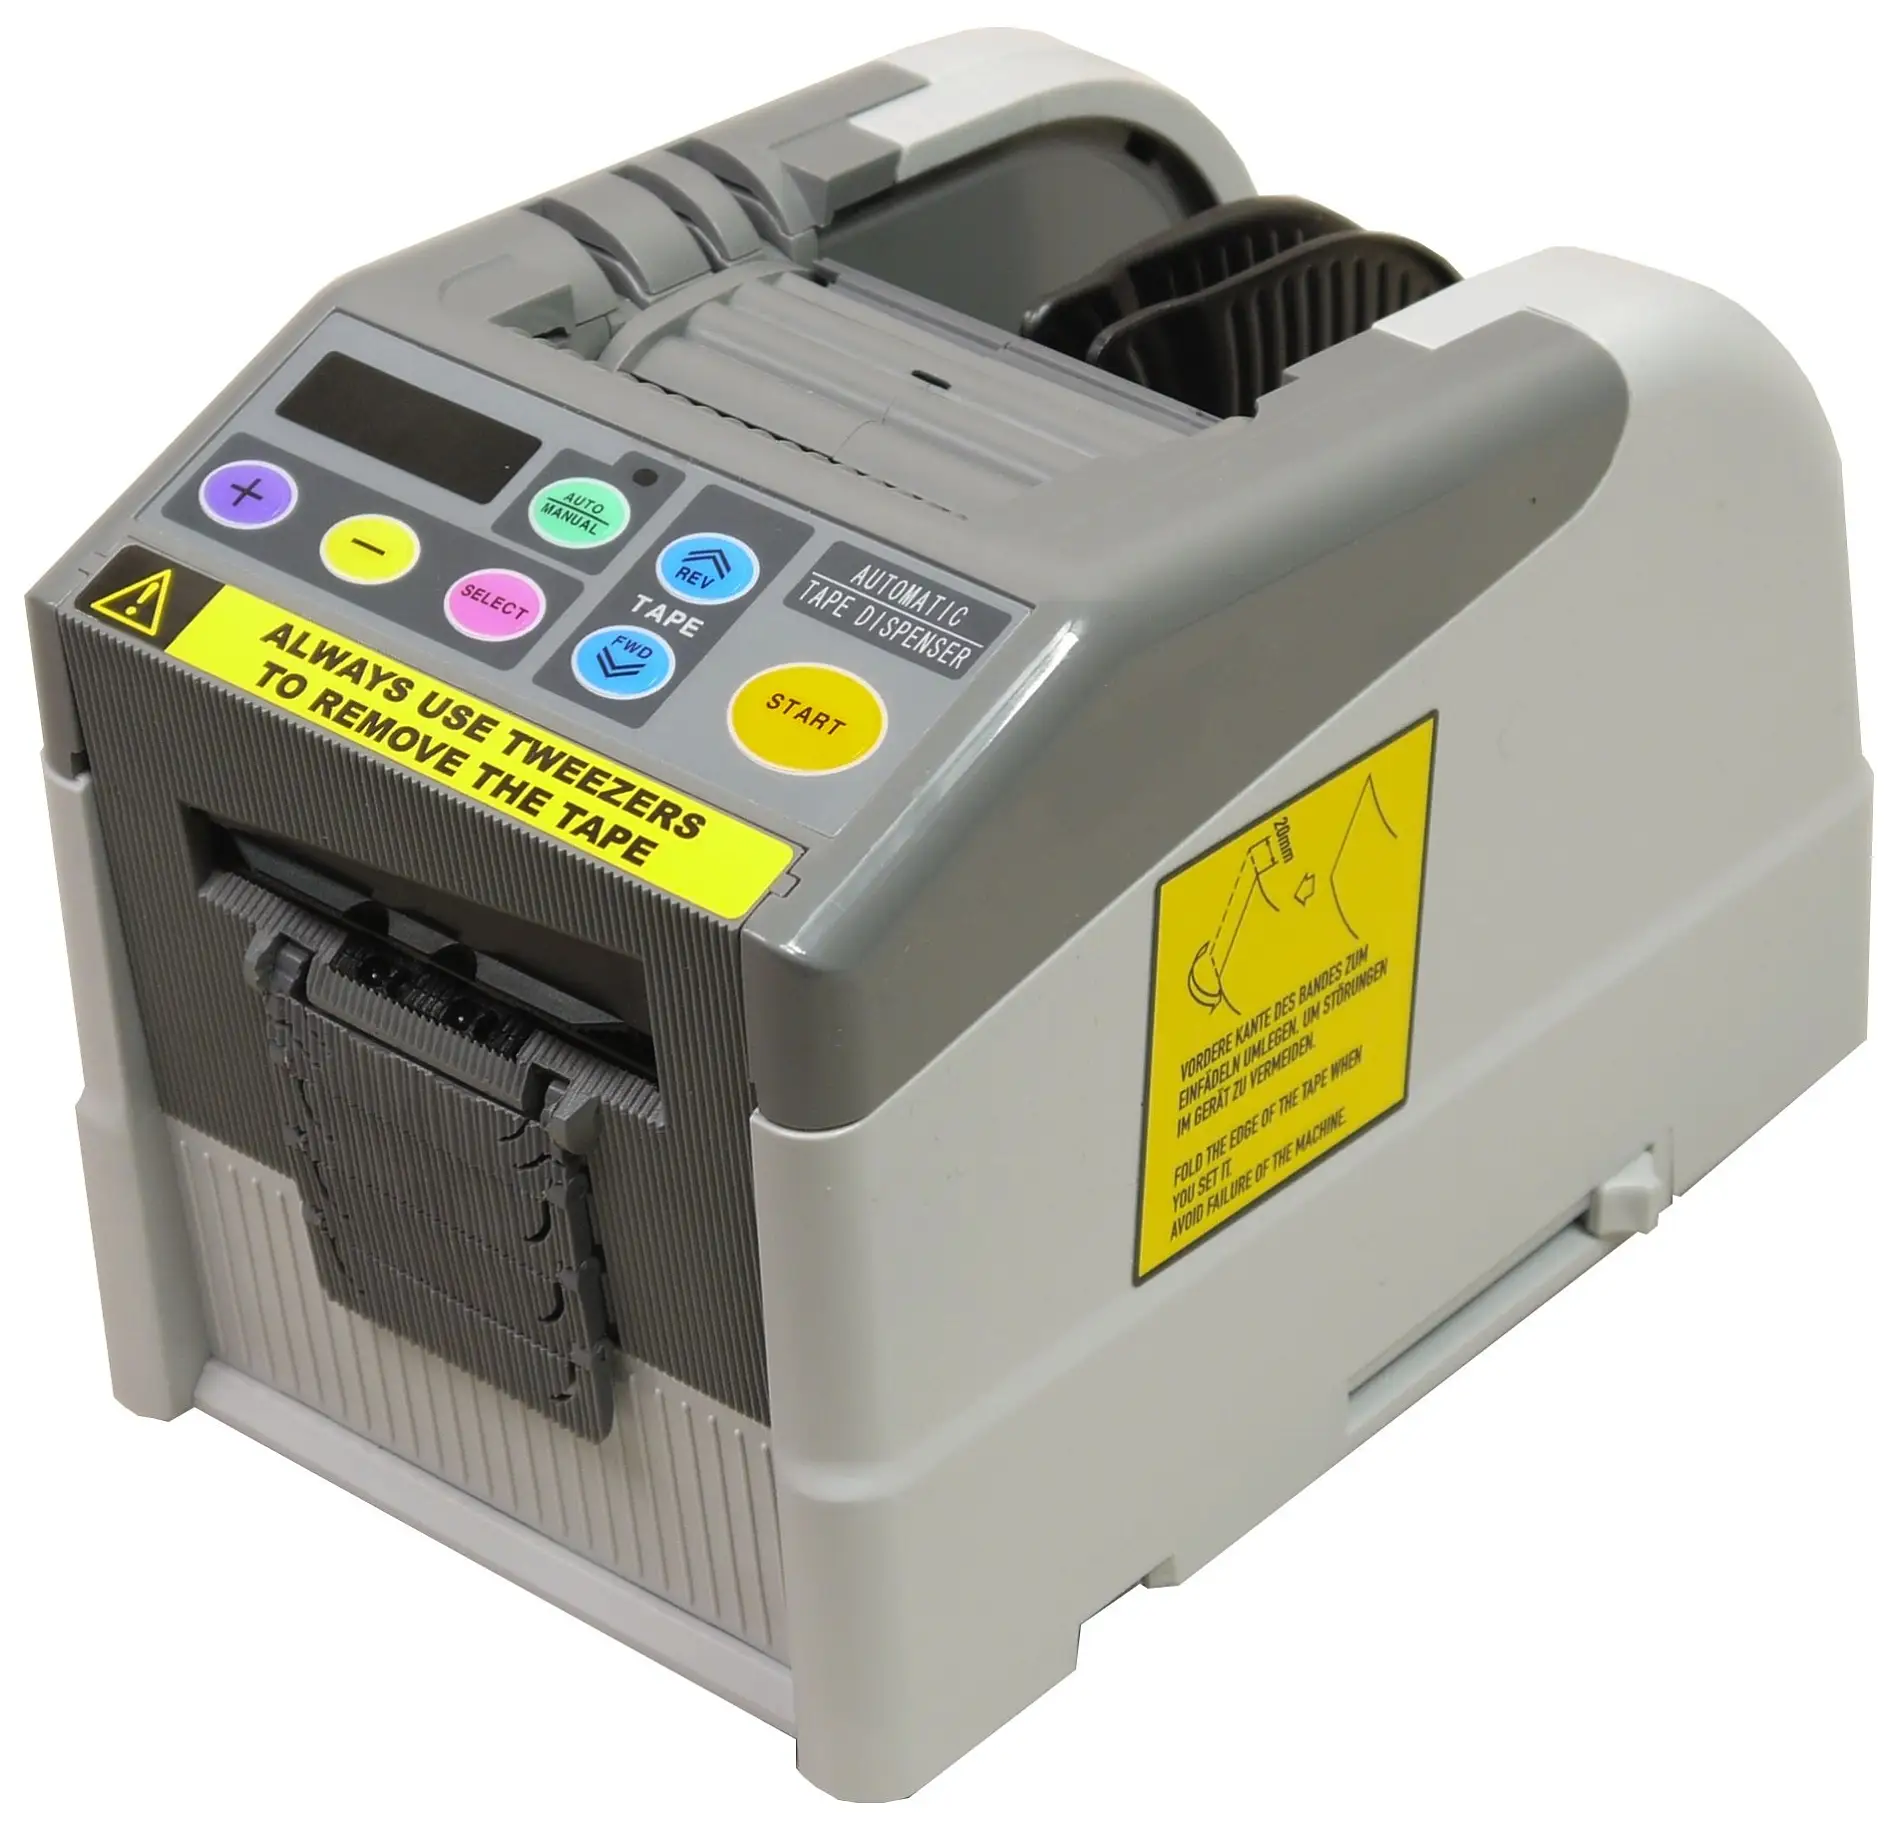 The tesa® 6068 is a fully-automatic dispenser with preset length, piece control and photo sensor cutter.